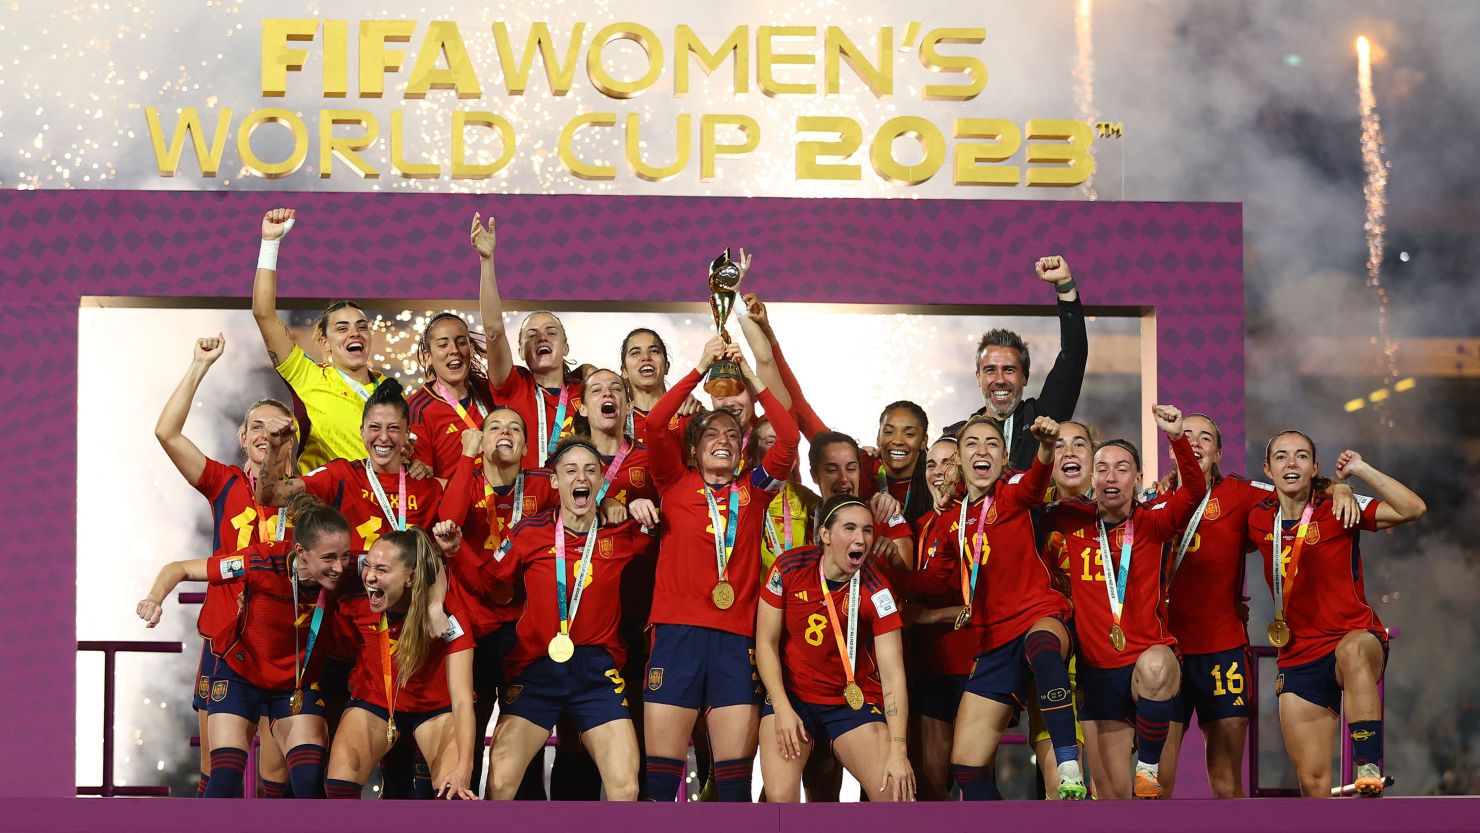 FIFA Women's World Cup 2023: All previous World Cup winners - complete list